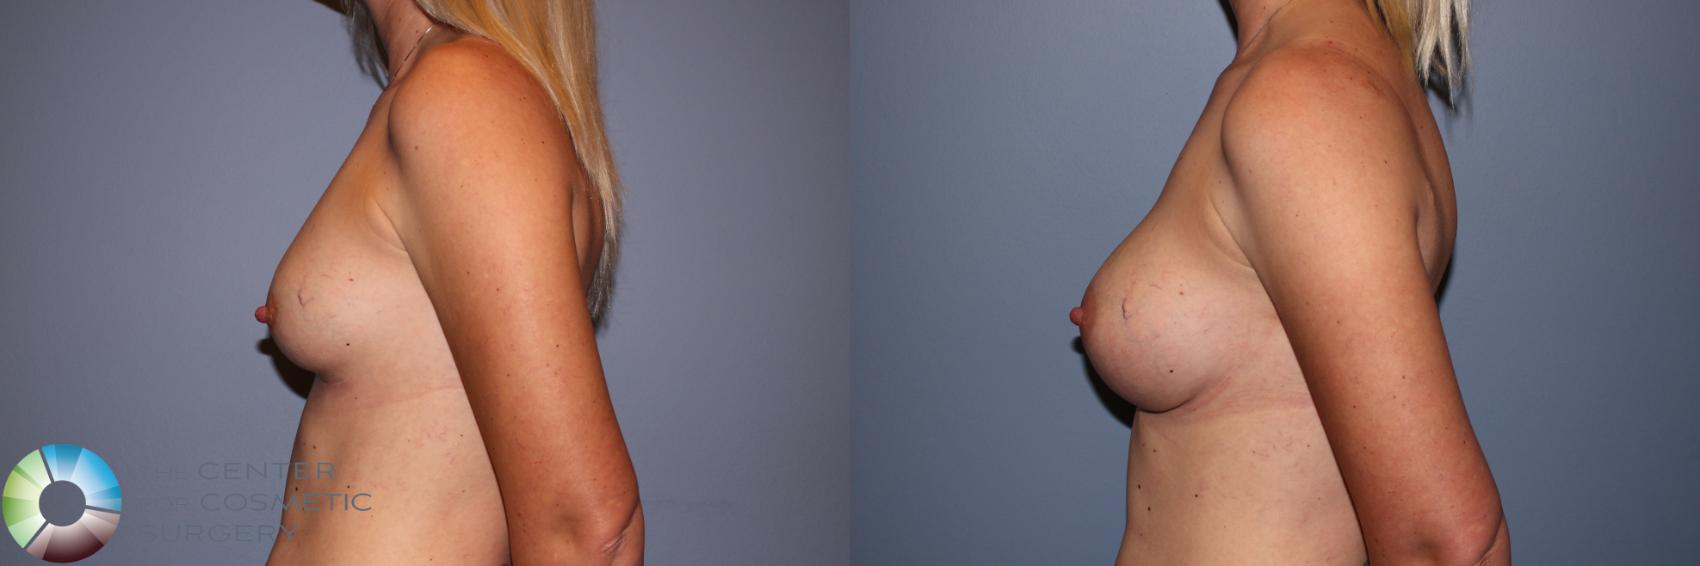 Before & After Breast Augmentation Case 11575 Left Side View in Golden, CO